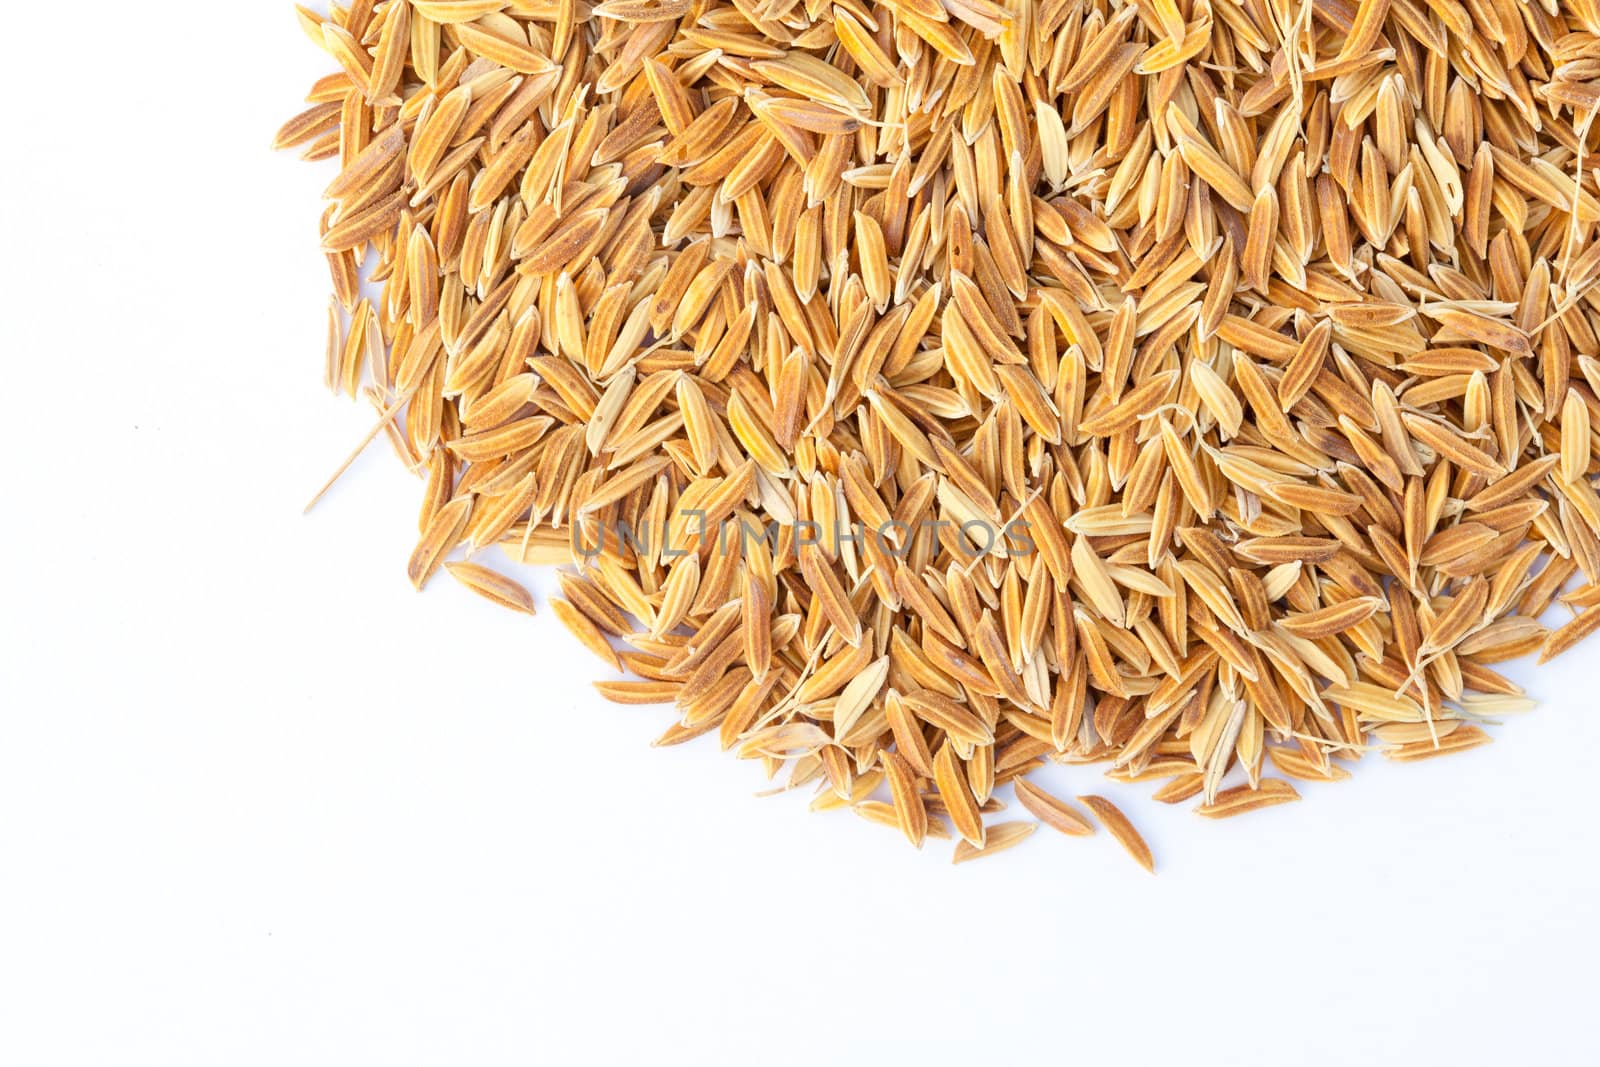 Brown rice paddy isolated on white.